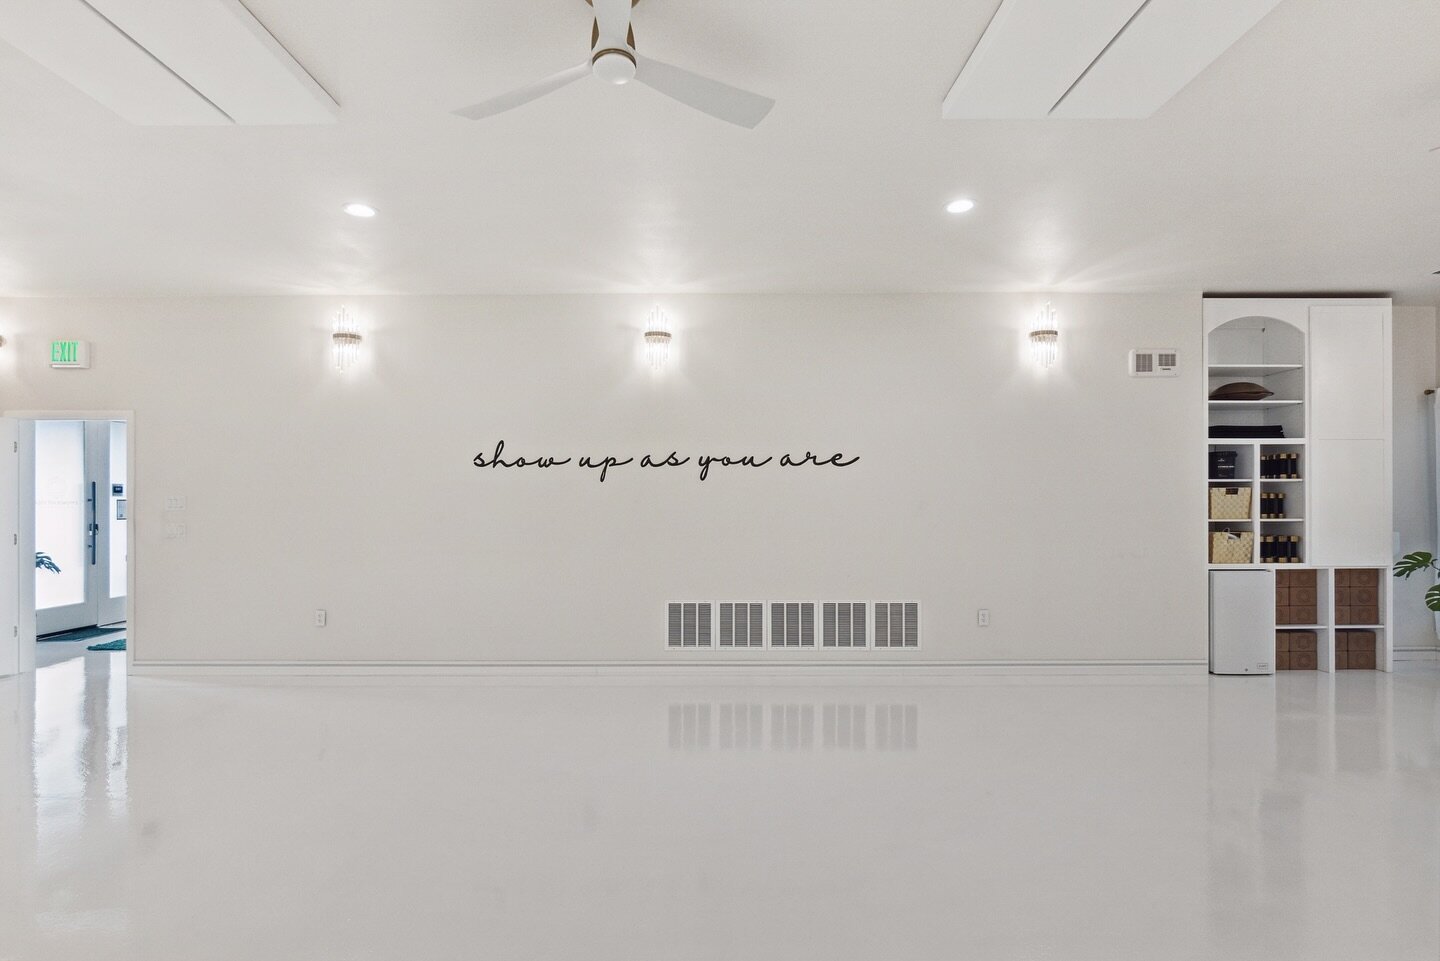 In a world that often encourages us to wear masks, both figuratively and literally, our studio offers a place where you can leave those masks at the door and step onto your mat authentically, vulnerably, and beautifully as you are. 

No need to prete